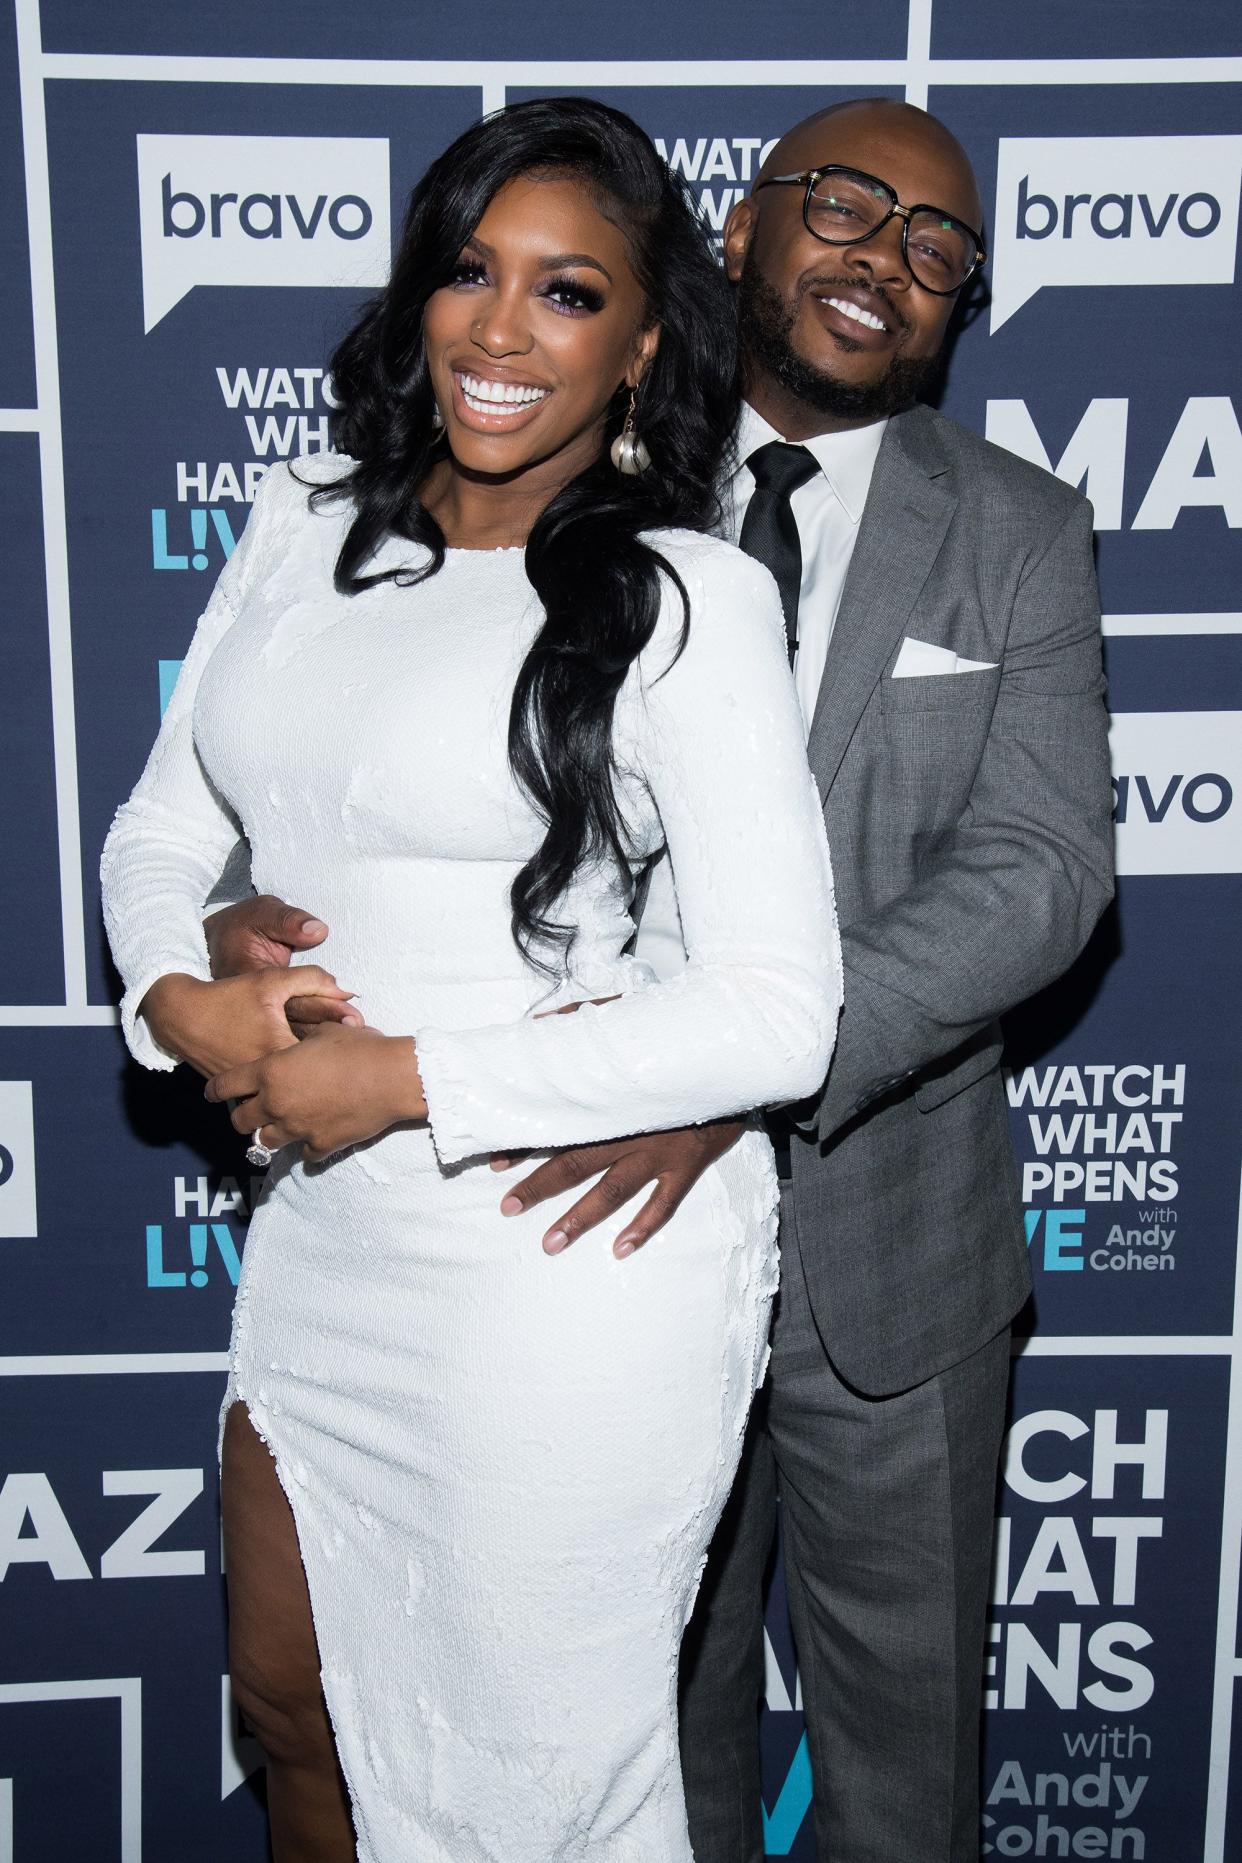 Porsha Williams and husband, Dennis McKinley look amazing as they hold on to each other in this picture